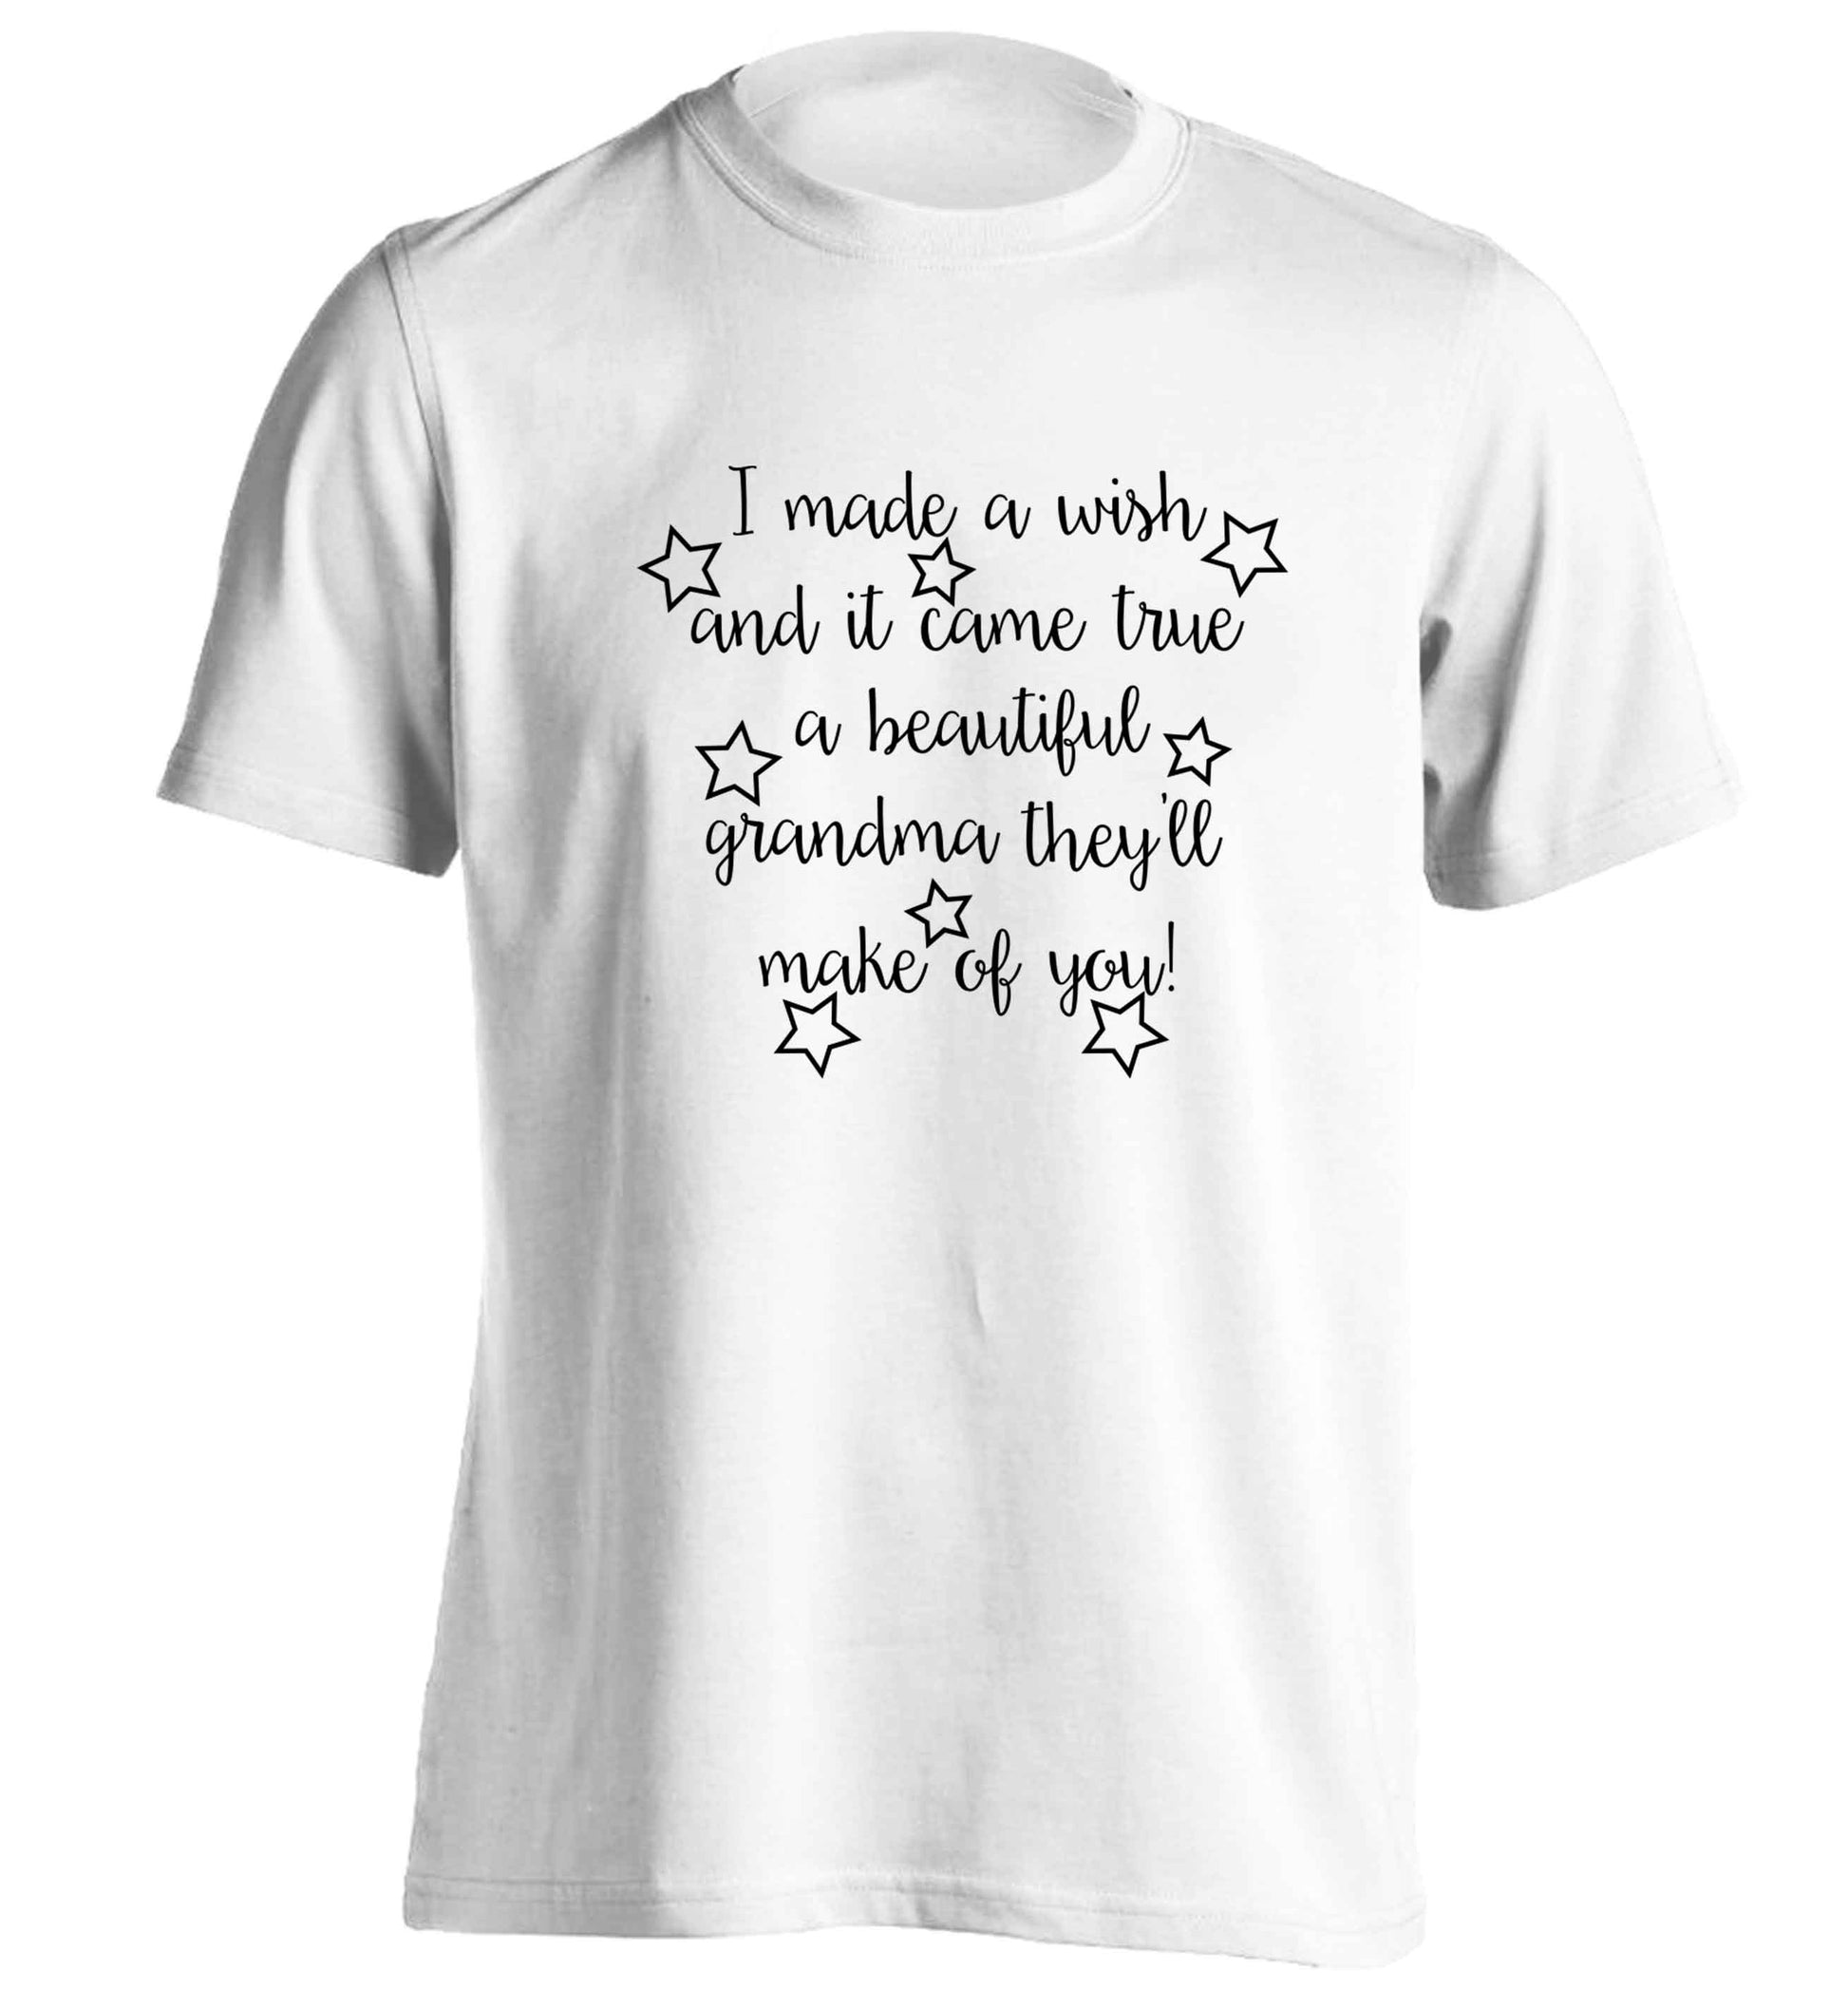 I made a wish and it came true a beautiful grandma they'll make of you! adults unisex white Tshirt 2XL